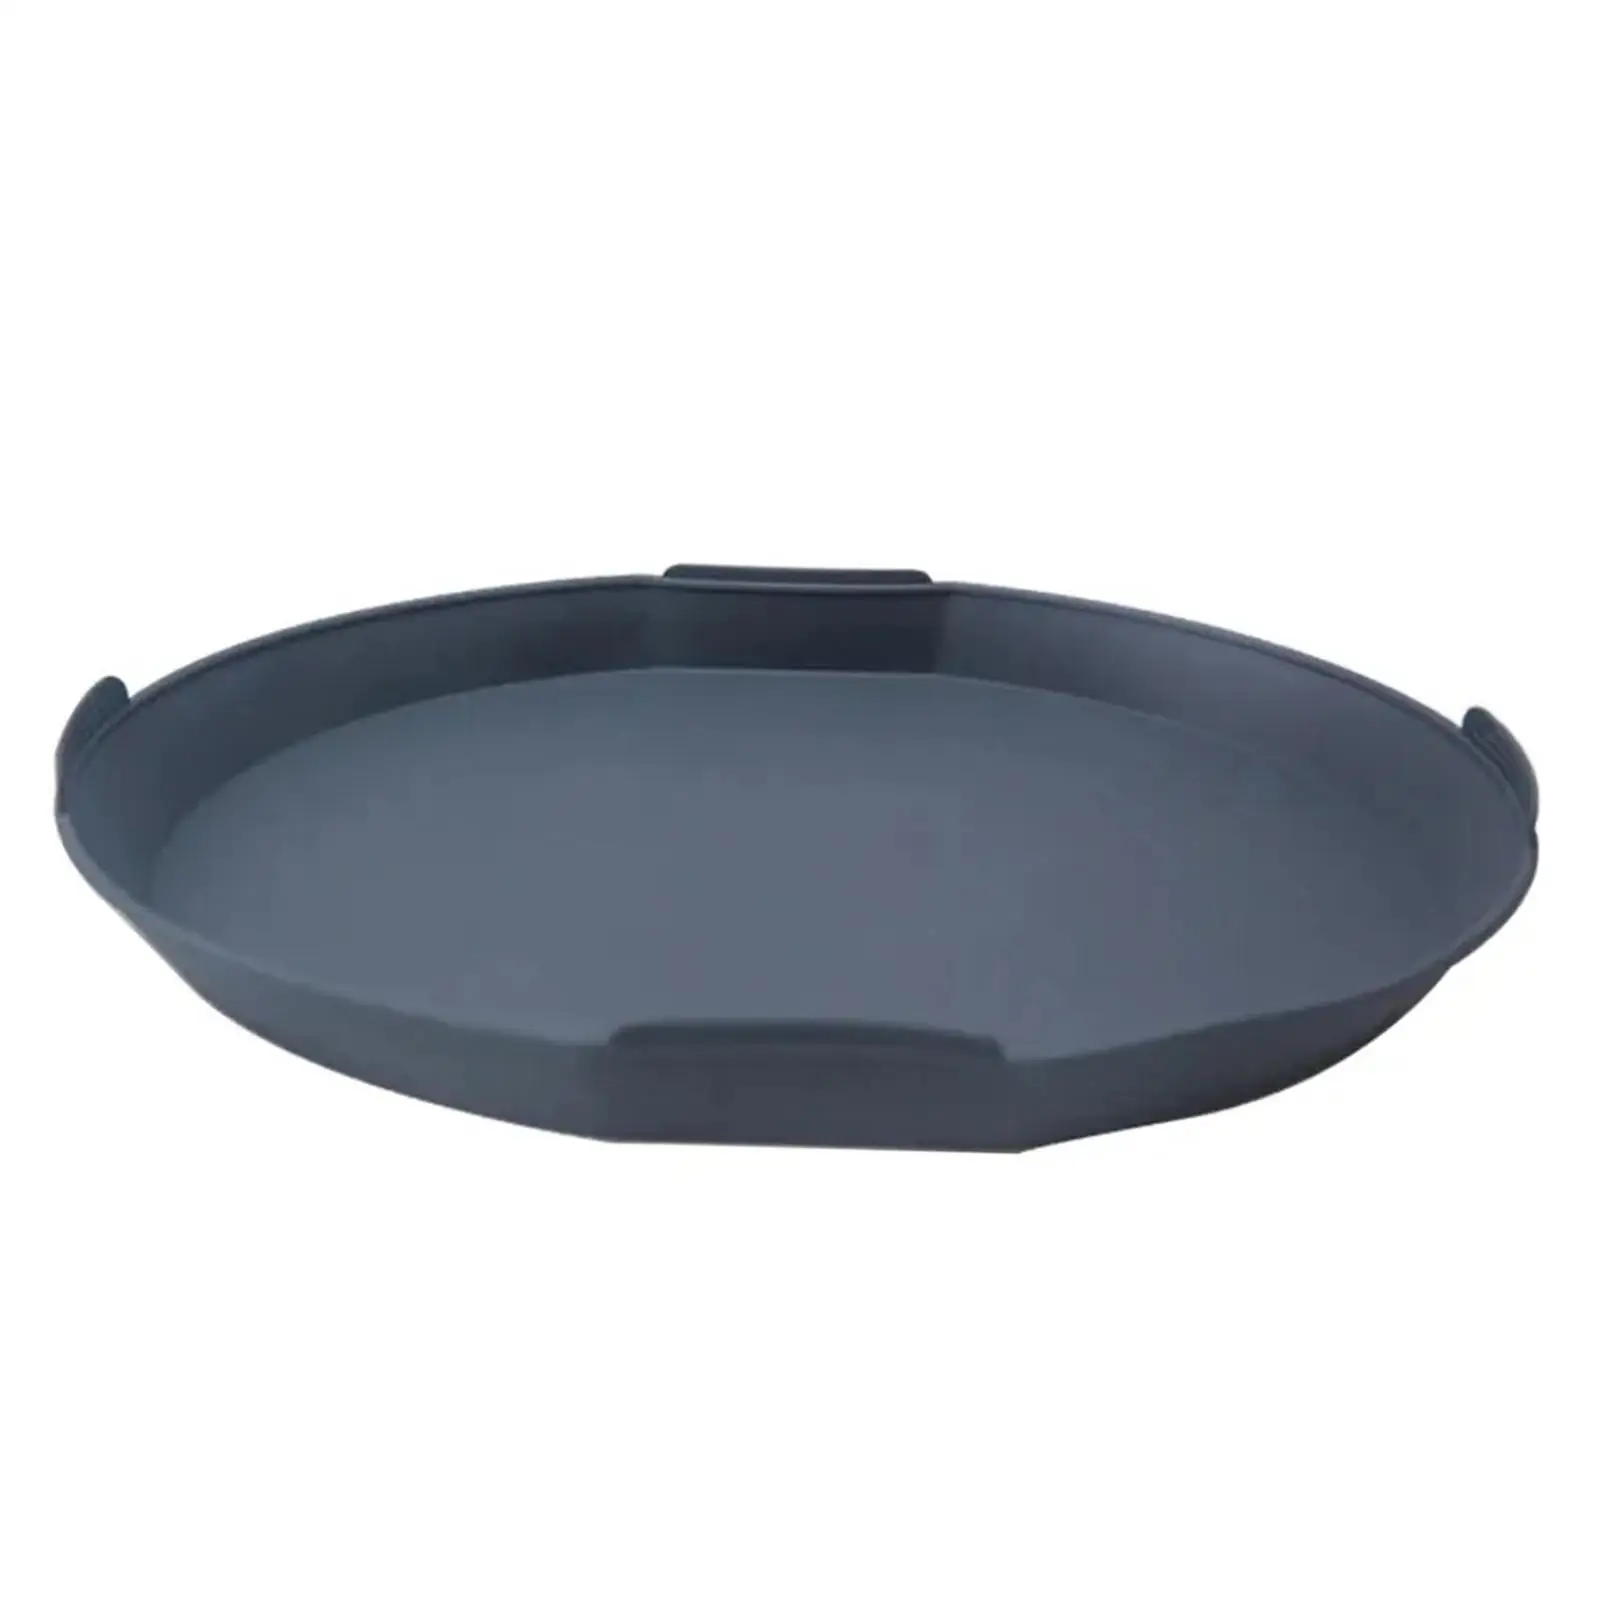 Grilling Pan Silicone Frying Nonstick Kitchen Accessory Barbecue Plate Electric Hot Plates for Steam Pot TM6 Fishing Beach